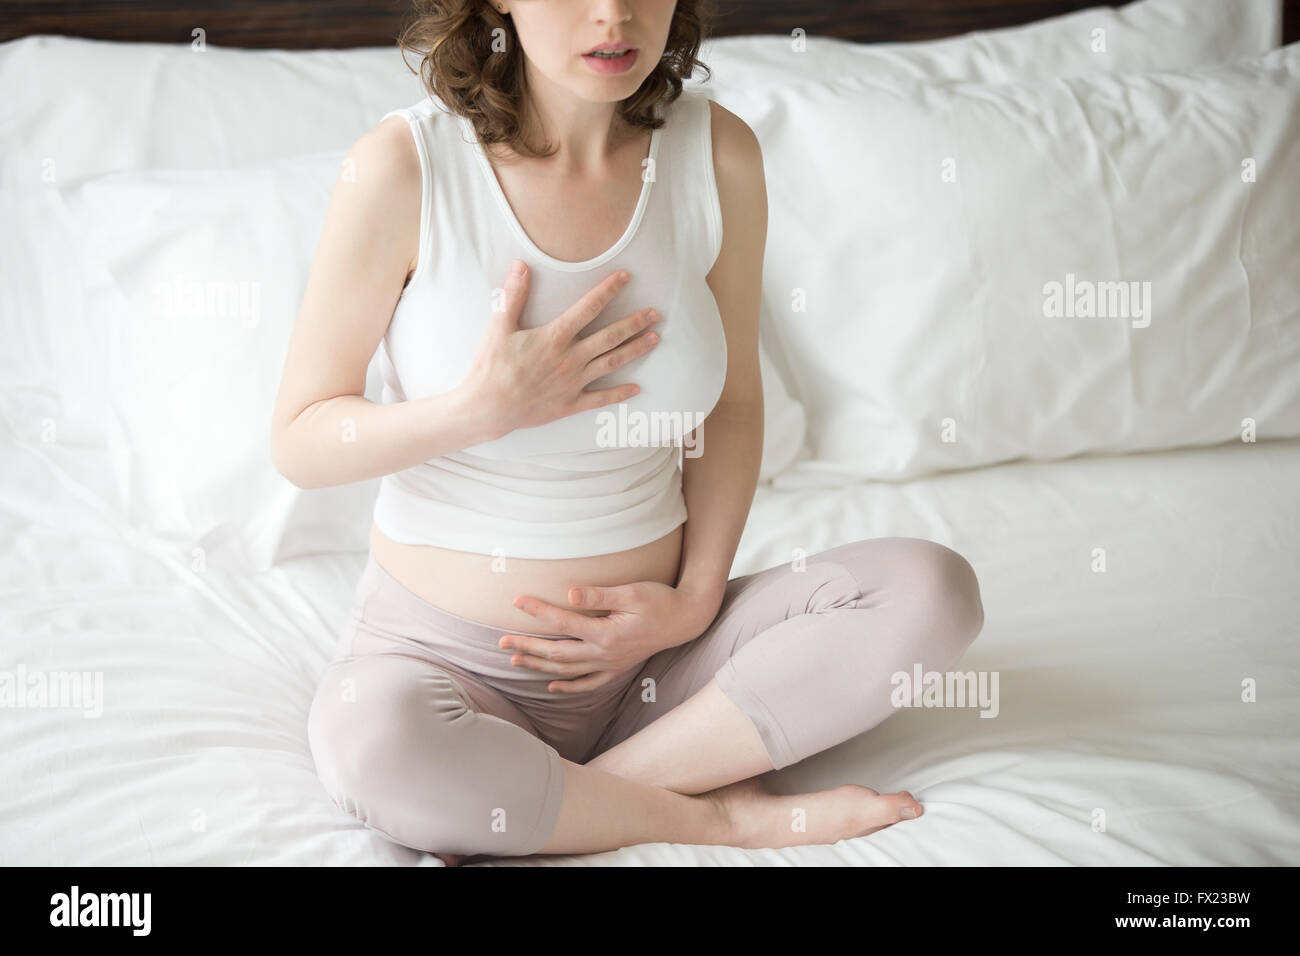 Close-up view of pregnant young woman doing yoga exercise. Female model sitting on the bed cross-legged in Easy Pose Stock Photo